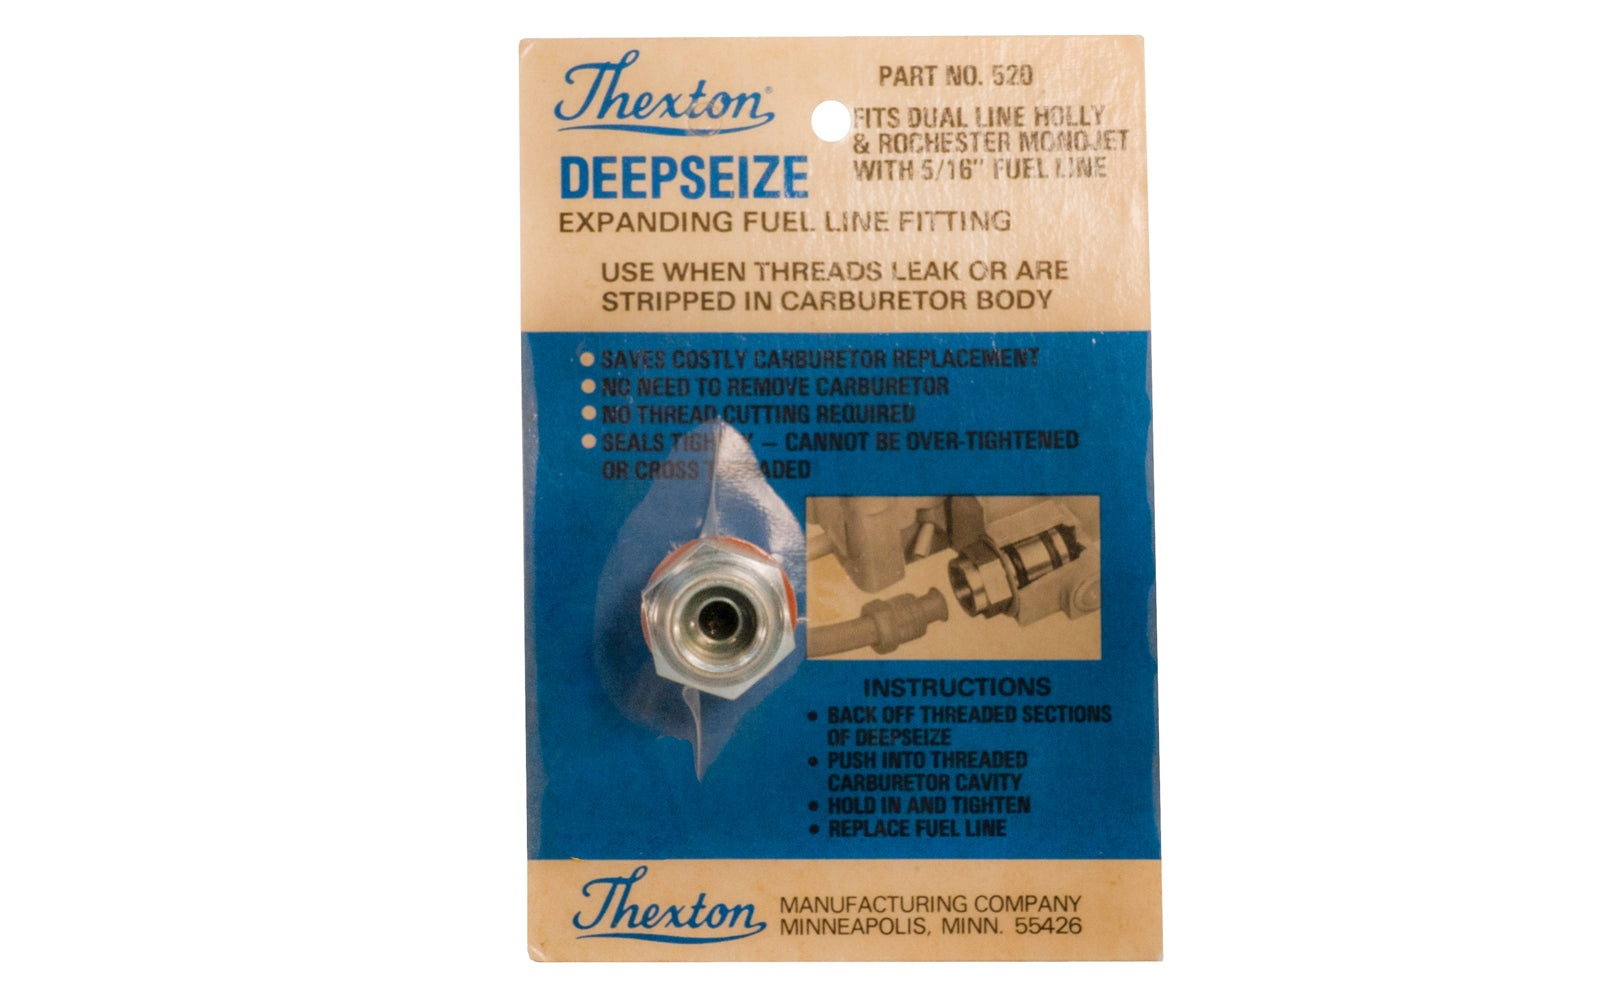 Thexton DeepSeize Expanding Fuel Line Fitting - Fits Dial Line Holly & Rochester MonoJet with 5/16